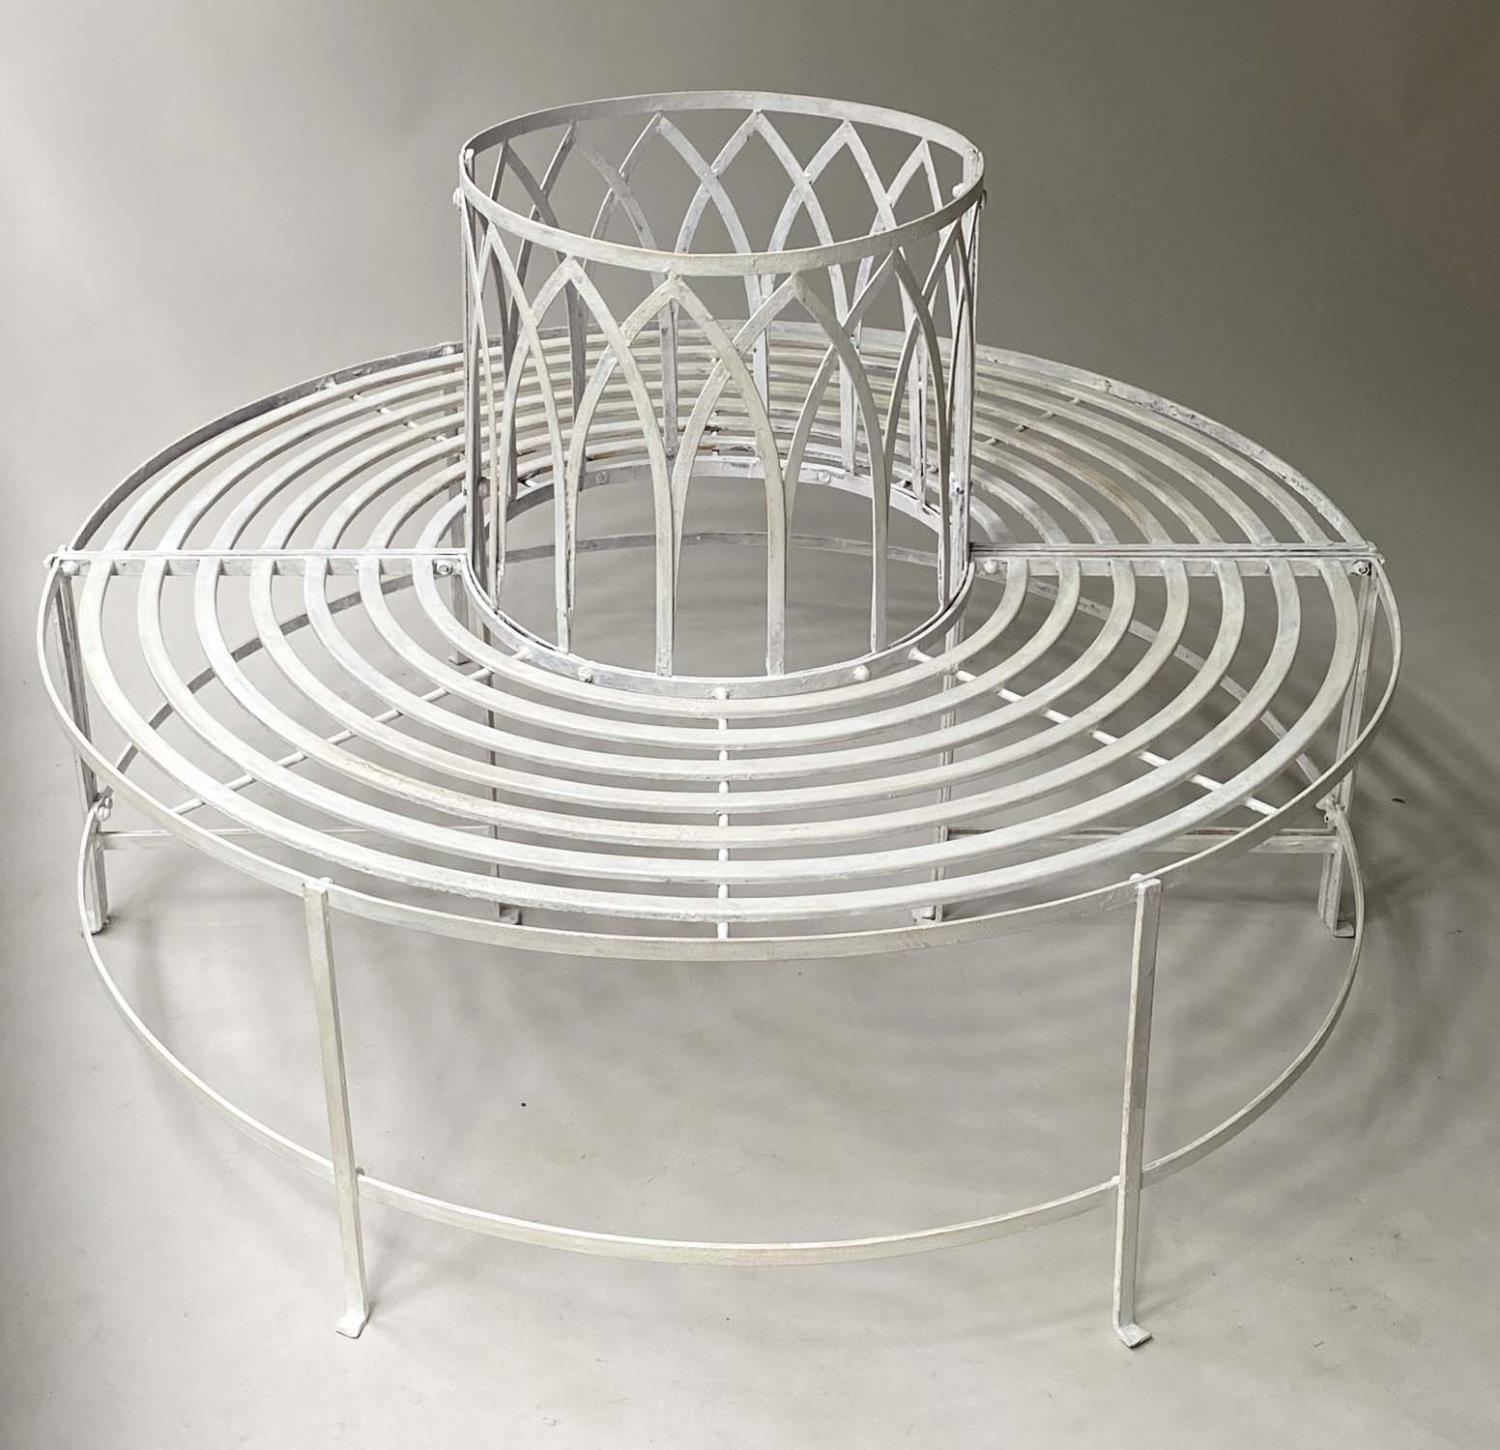 GARDEN TREE BENCH, white painted metal slatted full circle with Gothic arched upstand, 132cm W,